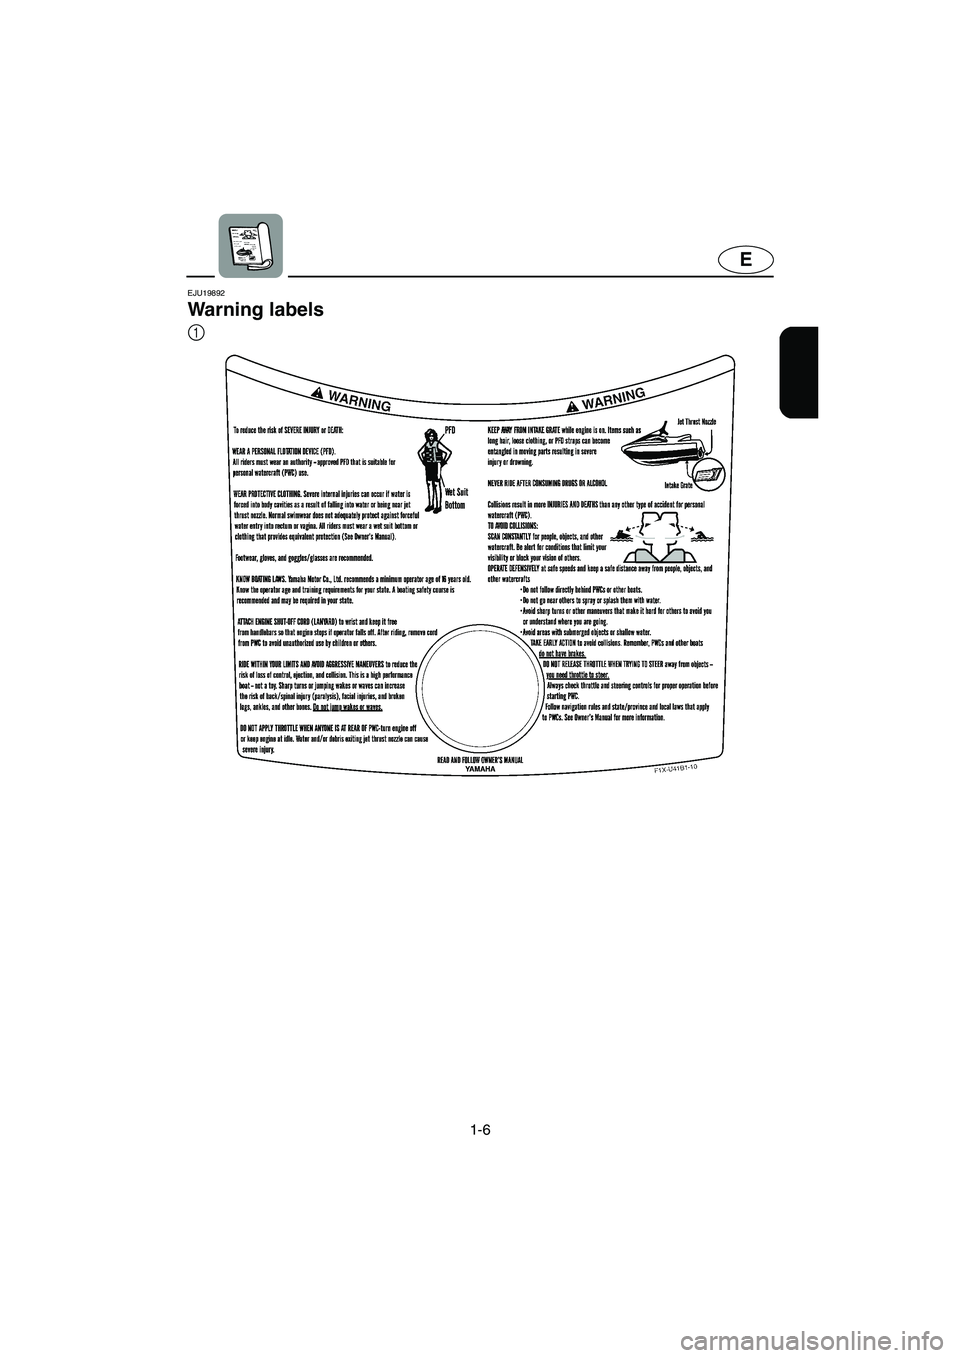 YAMAHA FX HO 2006 User Guide 1-6
E
EJU19892
Warning labels 
1
E_F1X-70-1.fm  Page 6  Monday, August 29, 2005  1:35 PM 